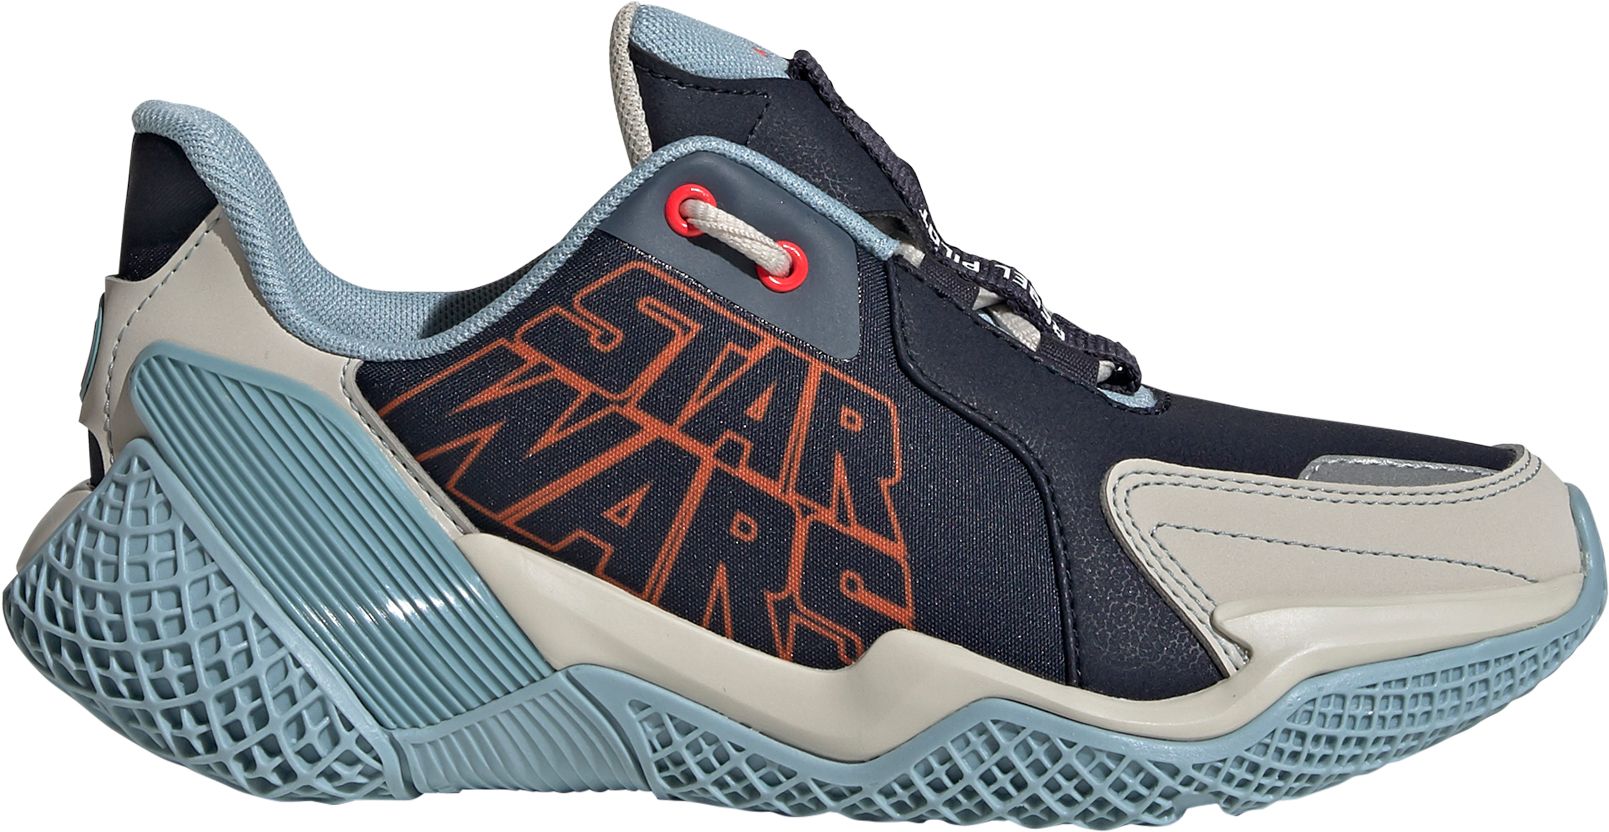 star wars sneakers for boys